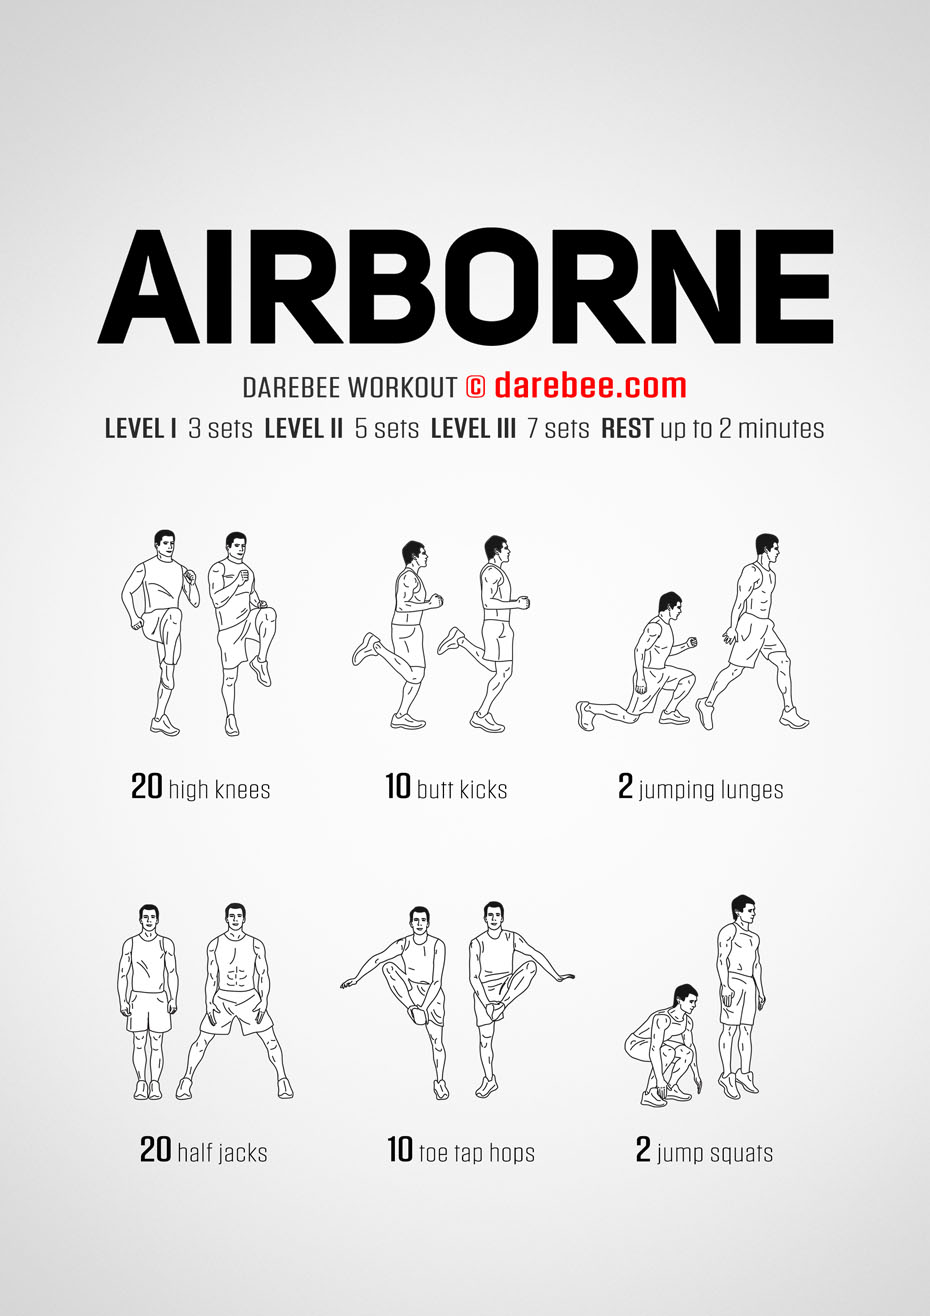 Airborne is a DAREBEE home-fitness, no-equipment cardiovascular and aerobic fitness workout that will push your cardio and aerobic fitness limits.